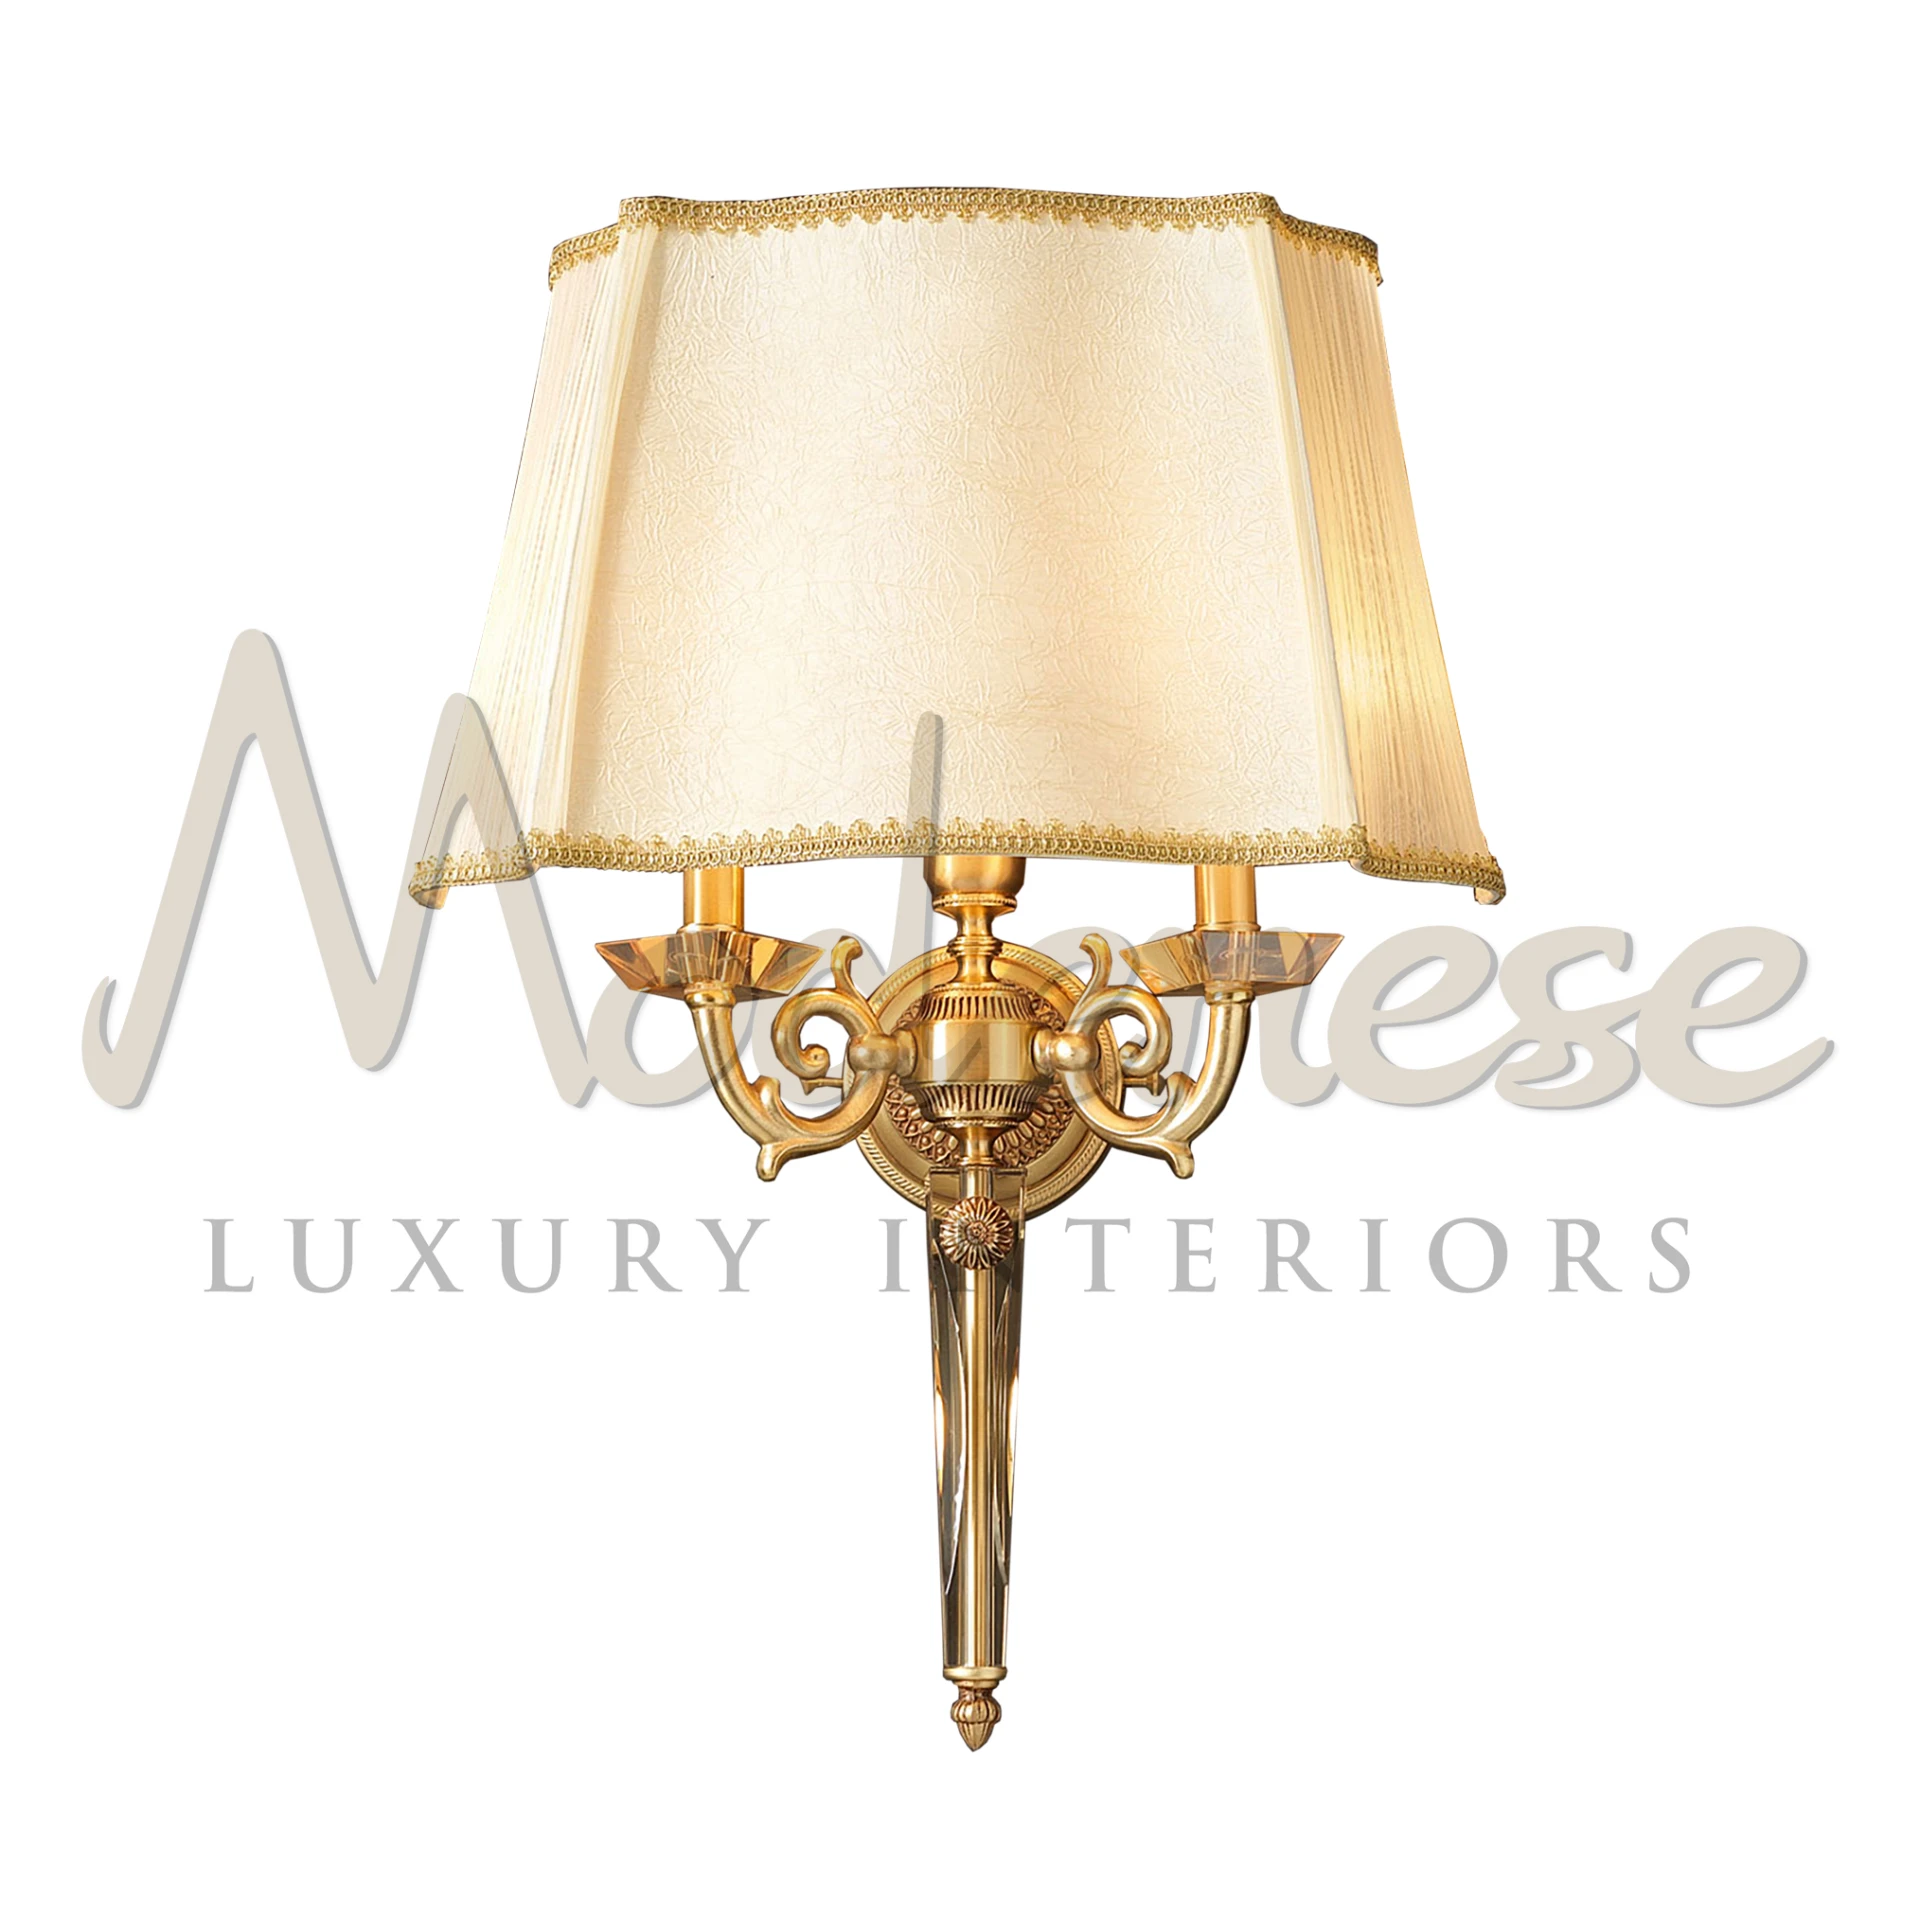 Shiny Gold Palazzo Lamp with Classic Shade and Fancy Base